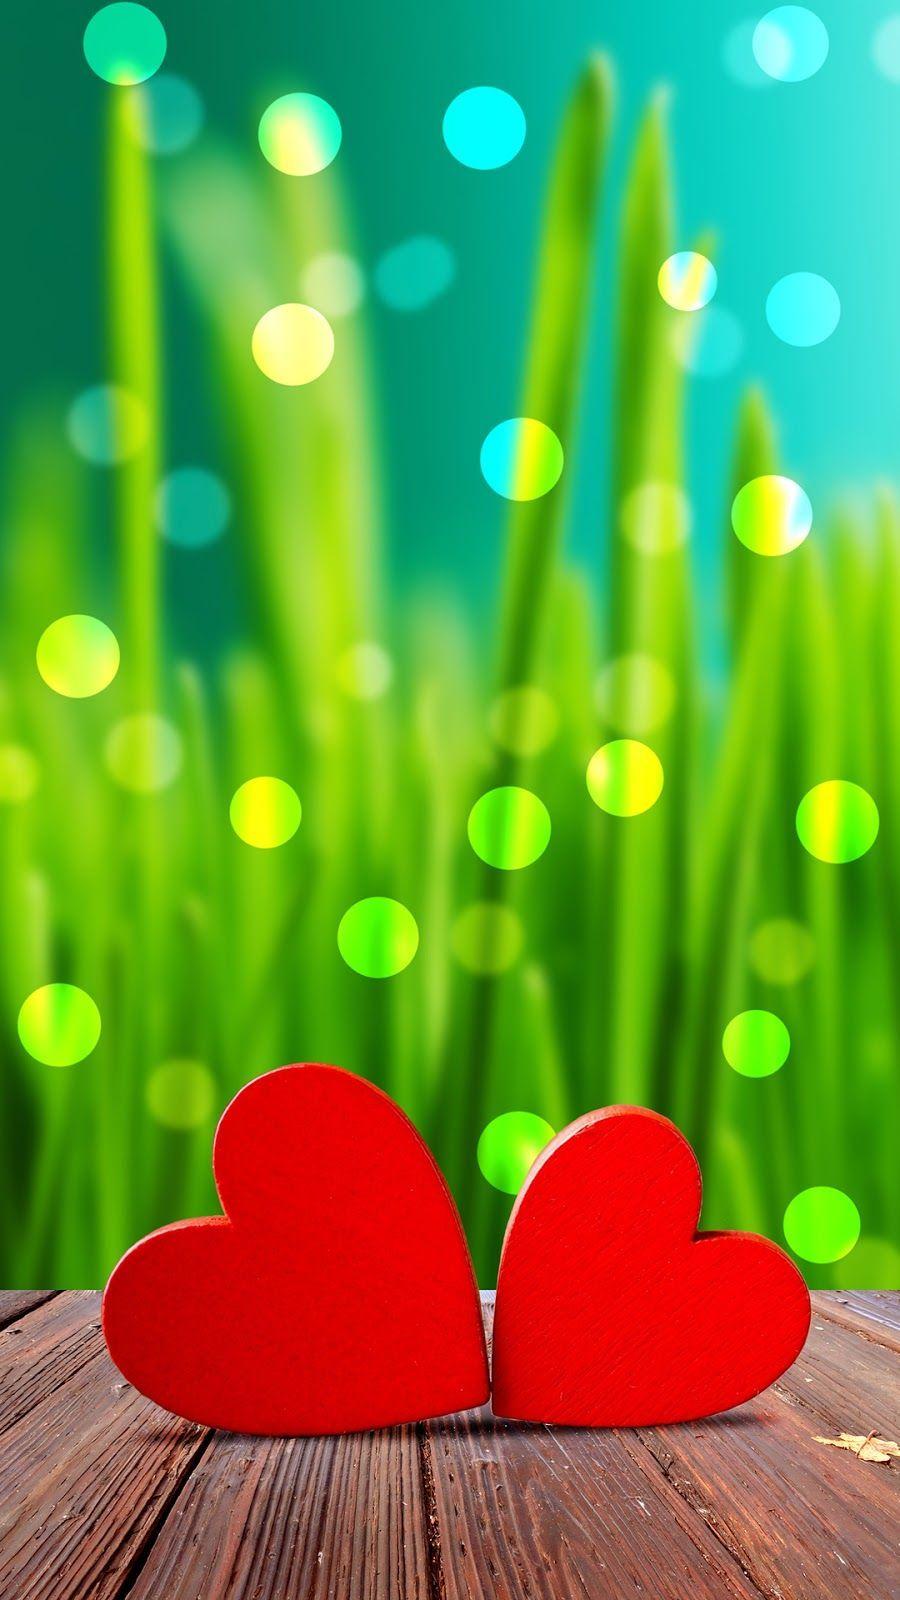 Cute Love Wallpapers For Iphone Wallpaper Cave